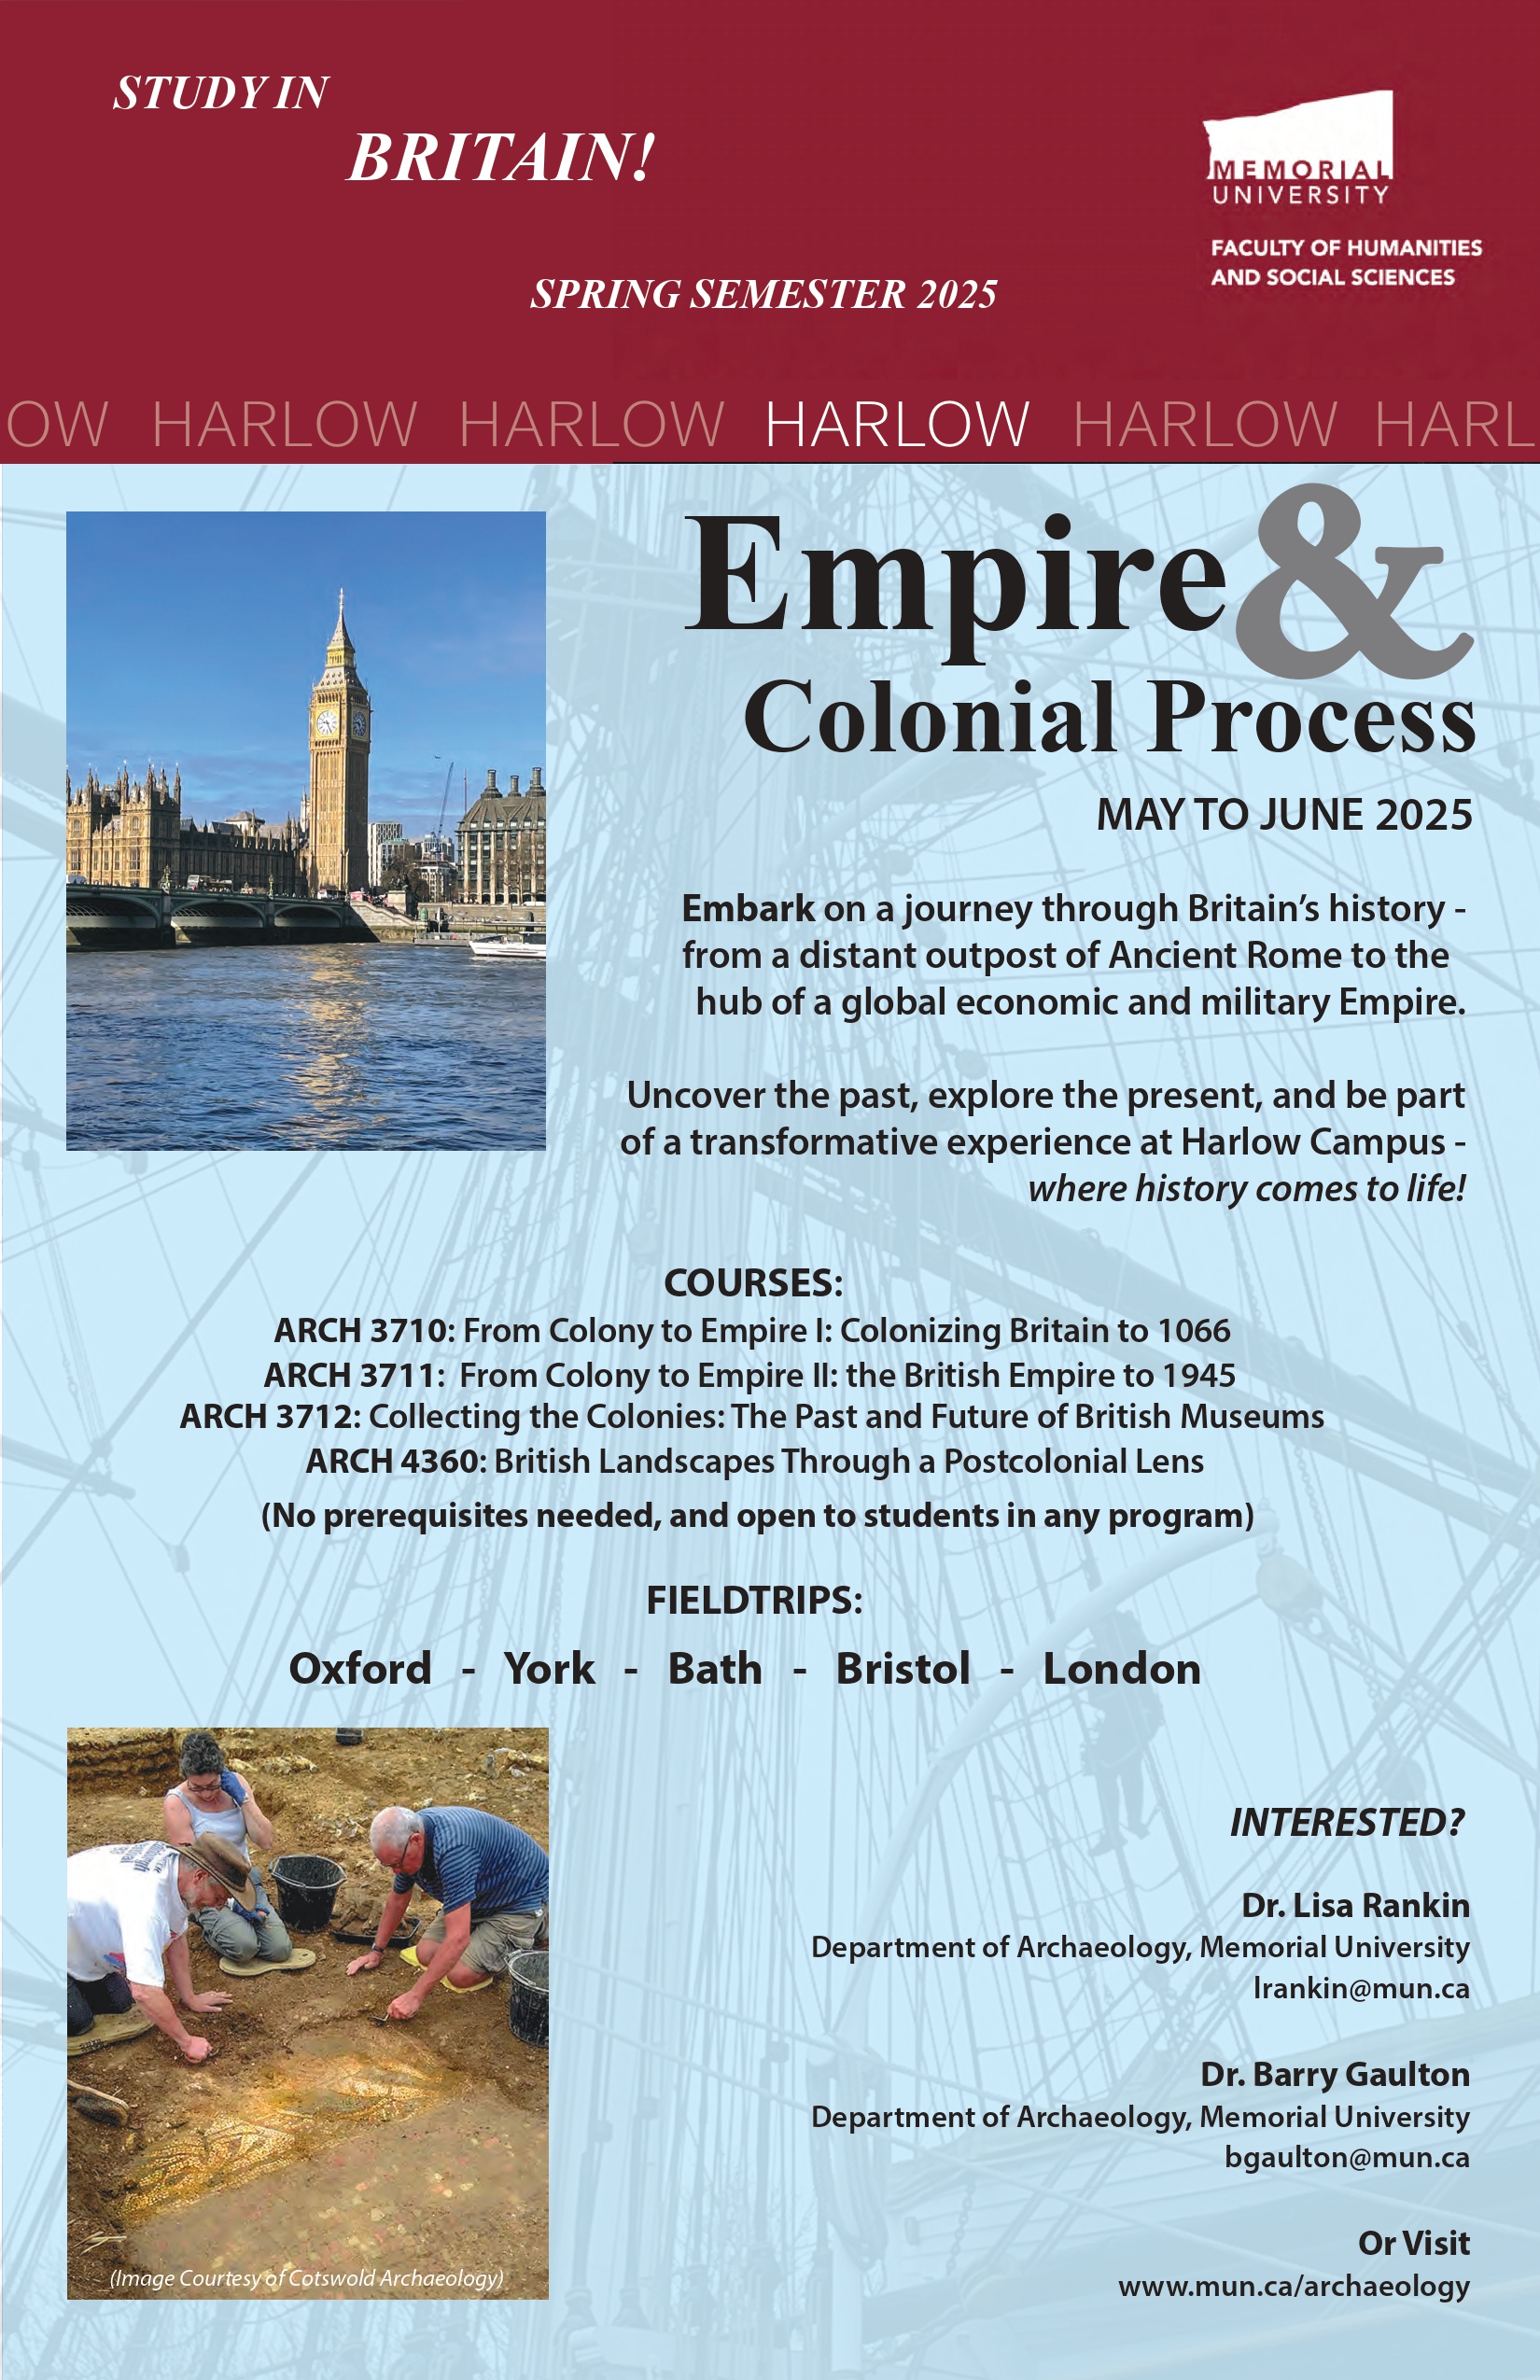 Poster describing a study abroad opportunity for Spring 2025 at Harlow Campus titled Empire & Colonial Process